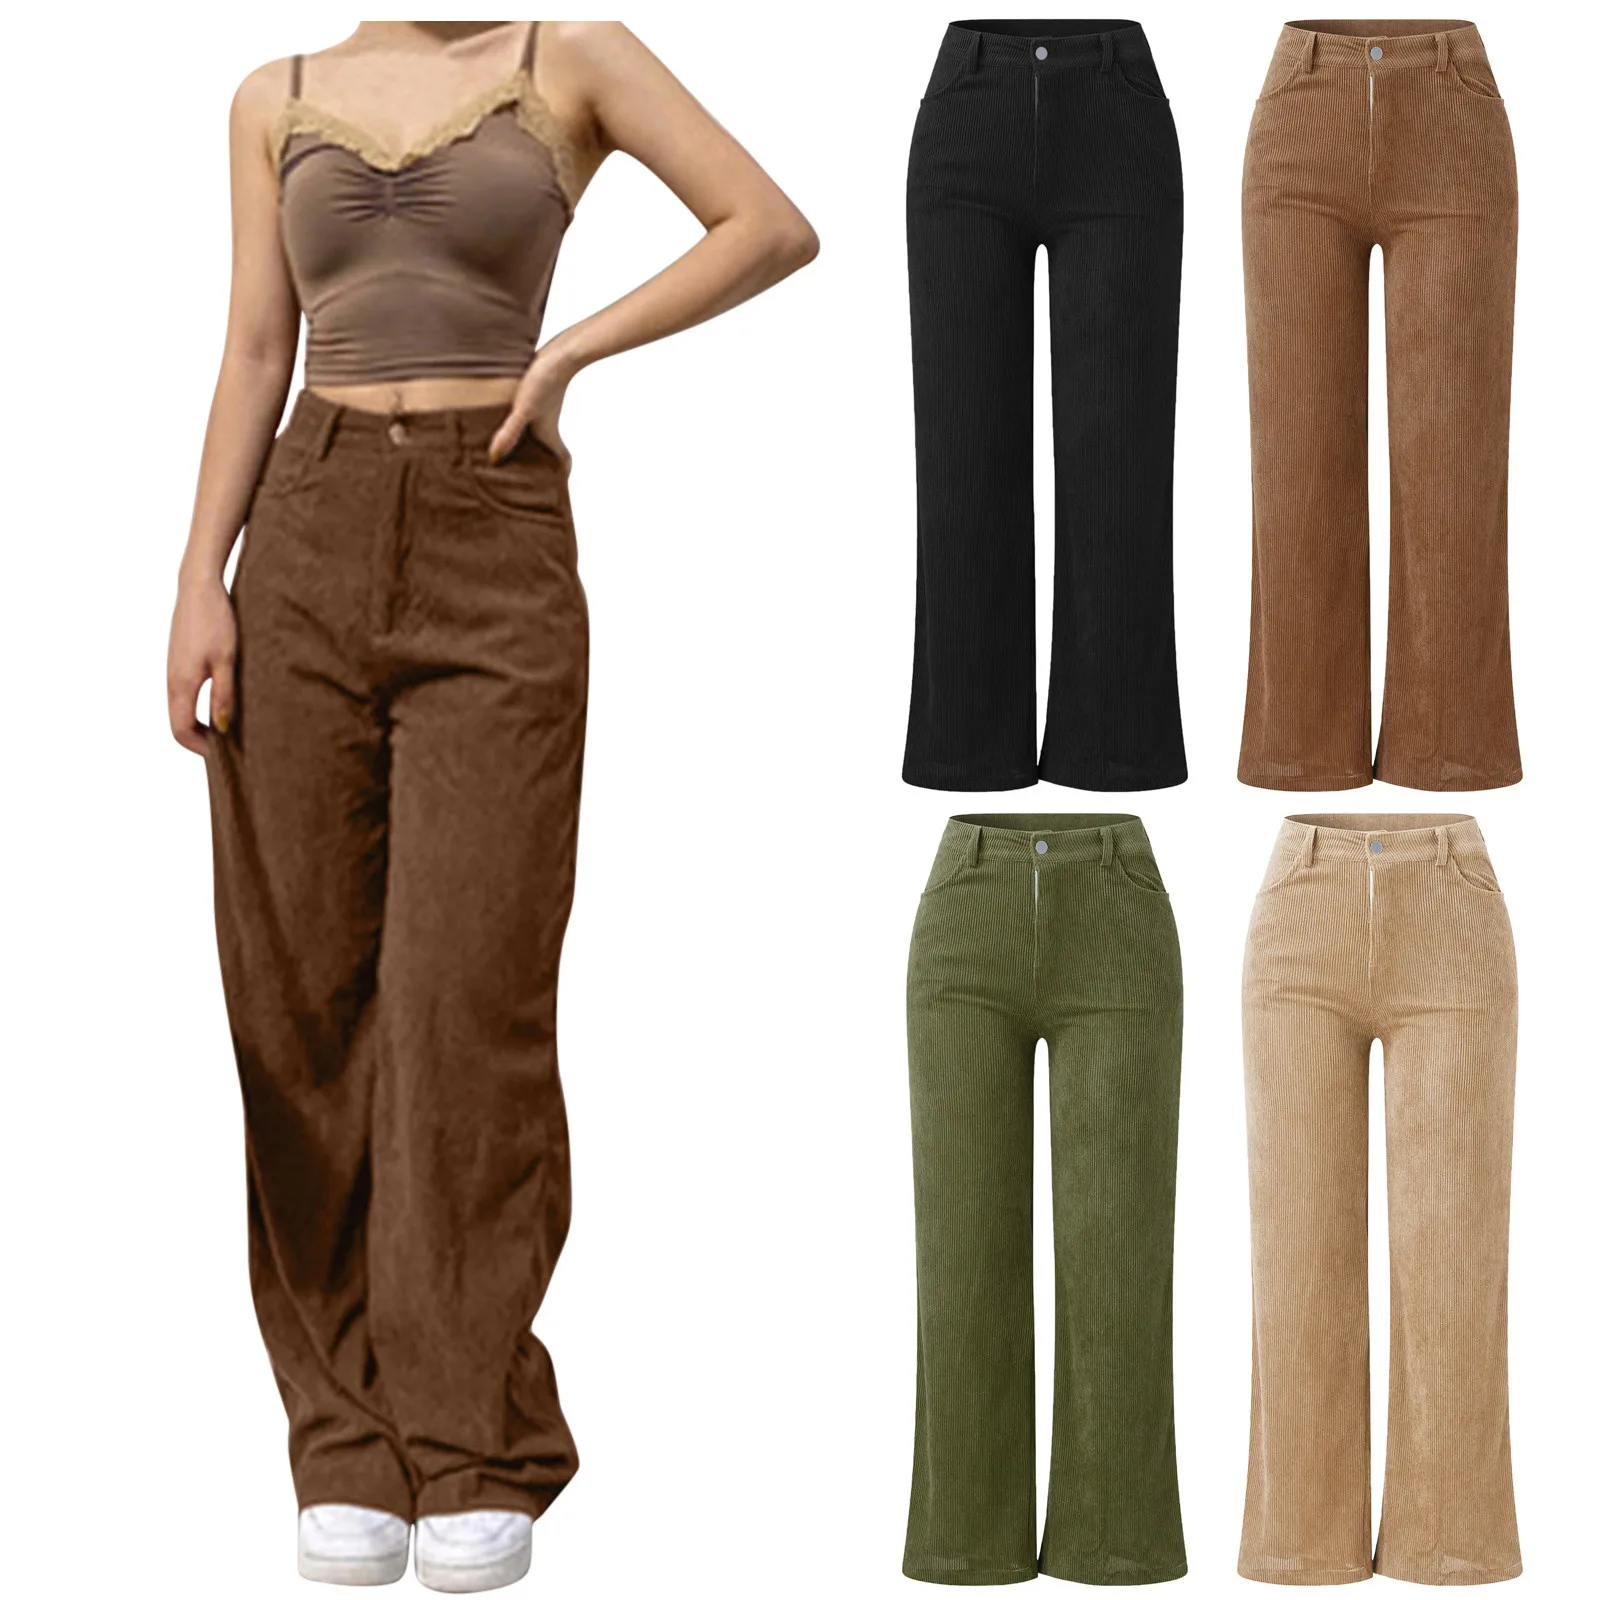 Fall breathable women's pants comfortable new clothing Women's corduroy mops fashion pleated wide-leg casual pants 2022 jeans pant